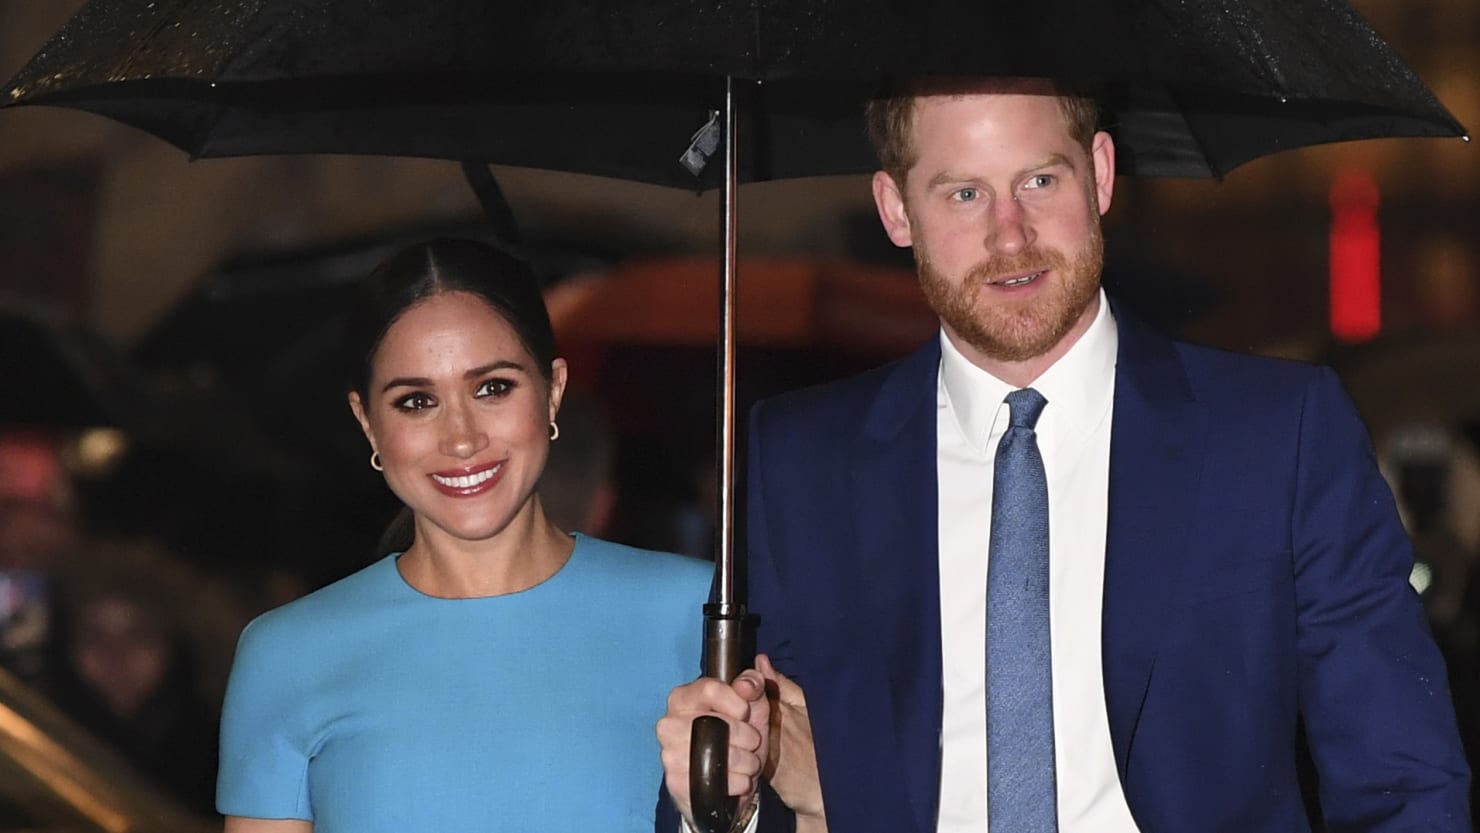 Meghan Markle and Prince Harry are begged to postpone the Oprah interview while Prince Philip is seriously ill